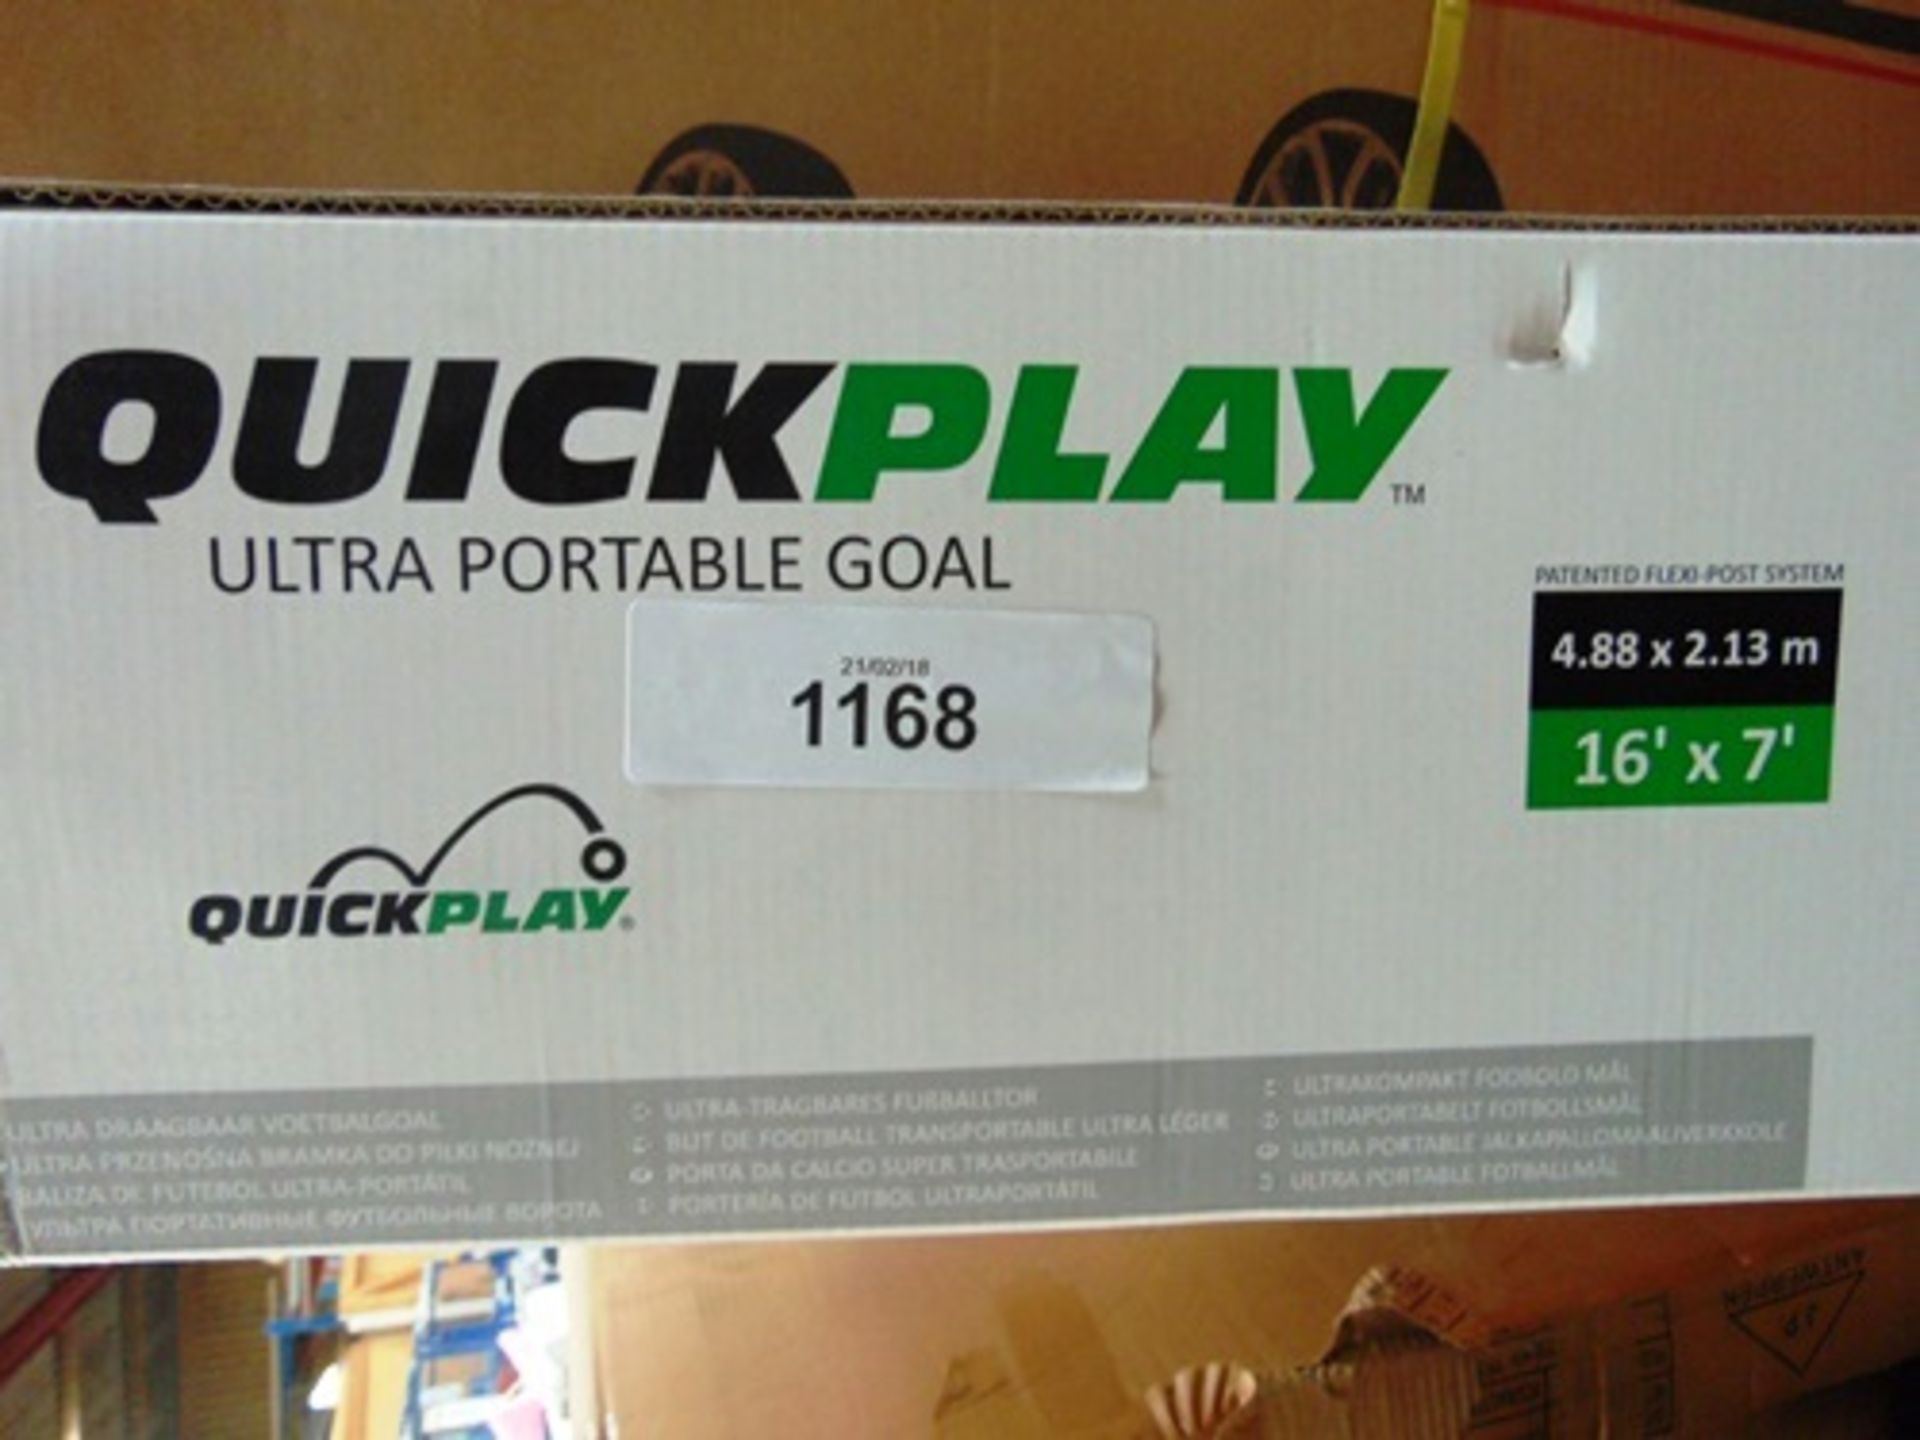 Flick Urban skill set football targets together with Quick Play ultra-portable goal, 4.88 x 2. - Image 3 of 3